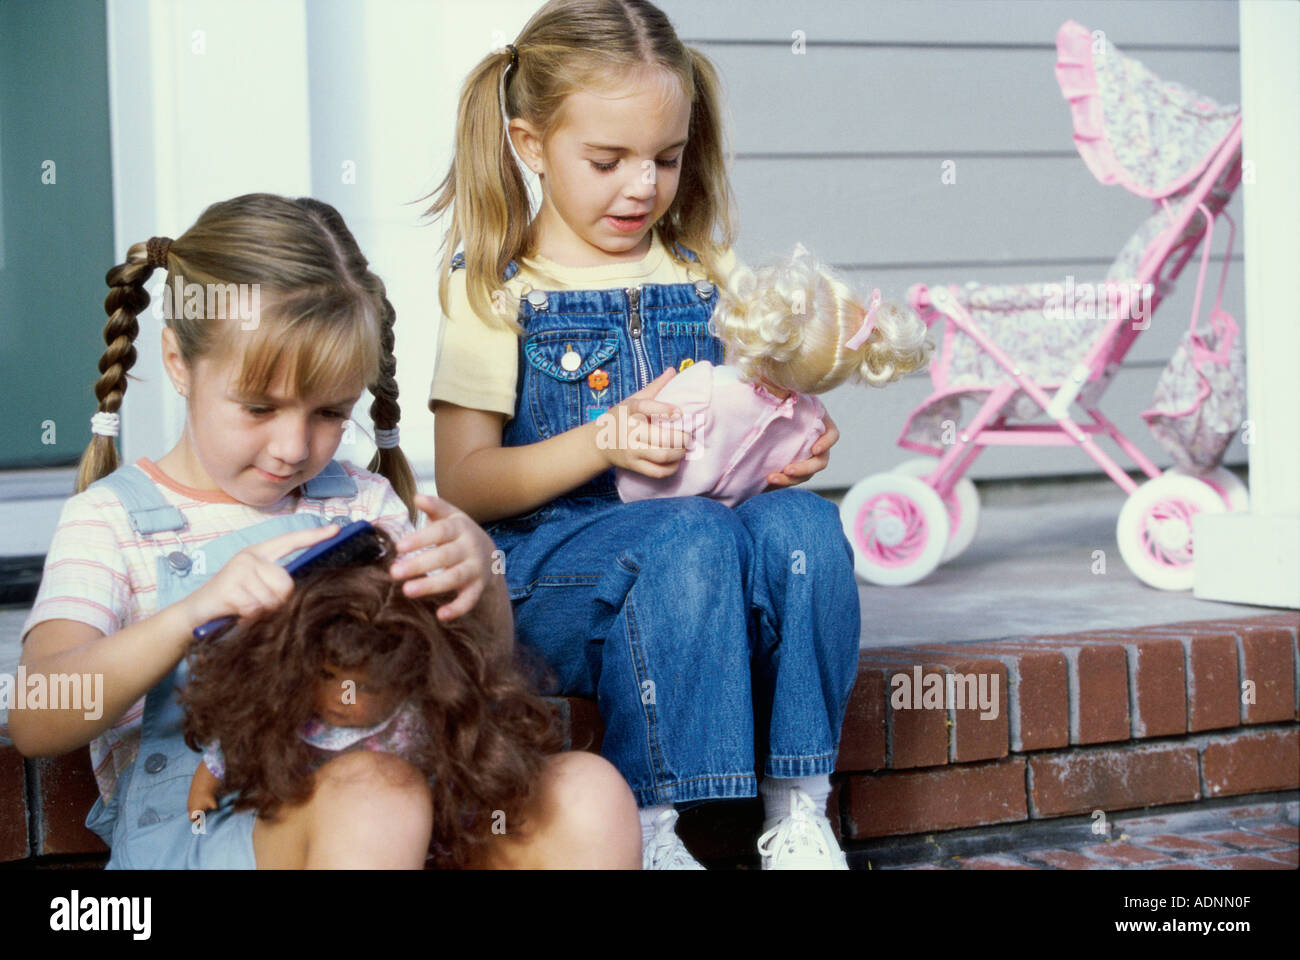 Two girls sitting together with their dolls Stock Photo